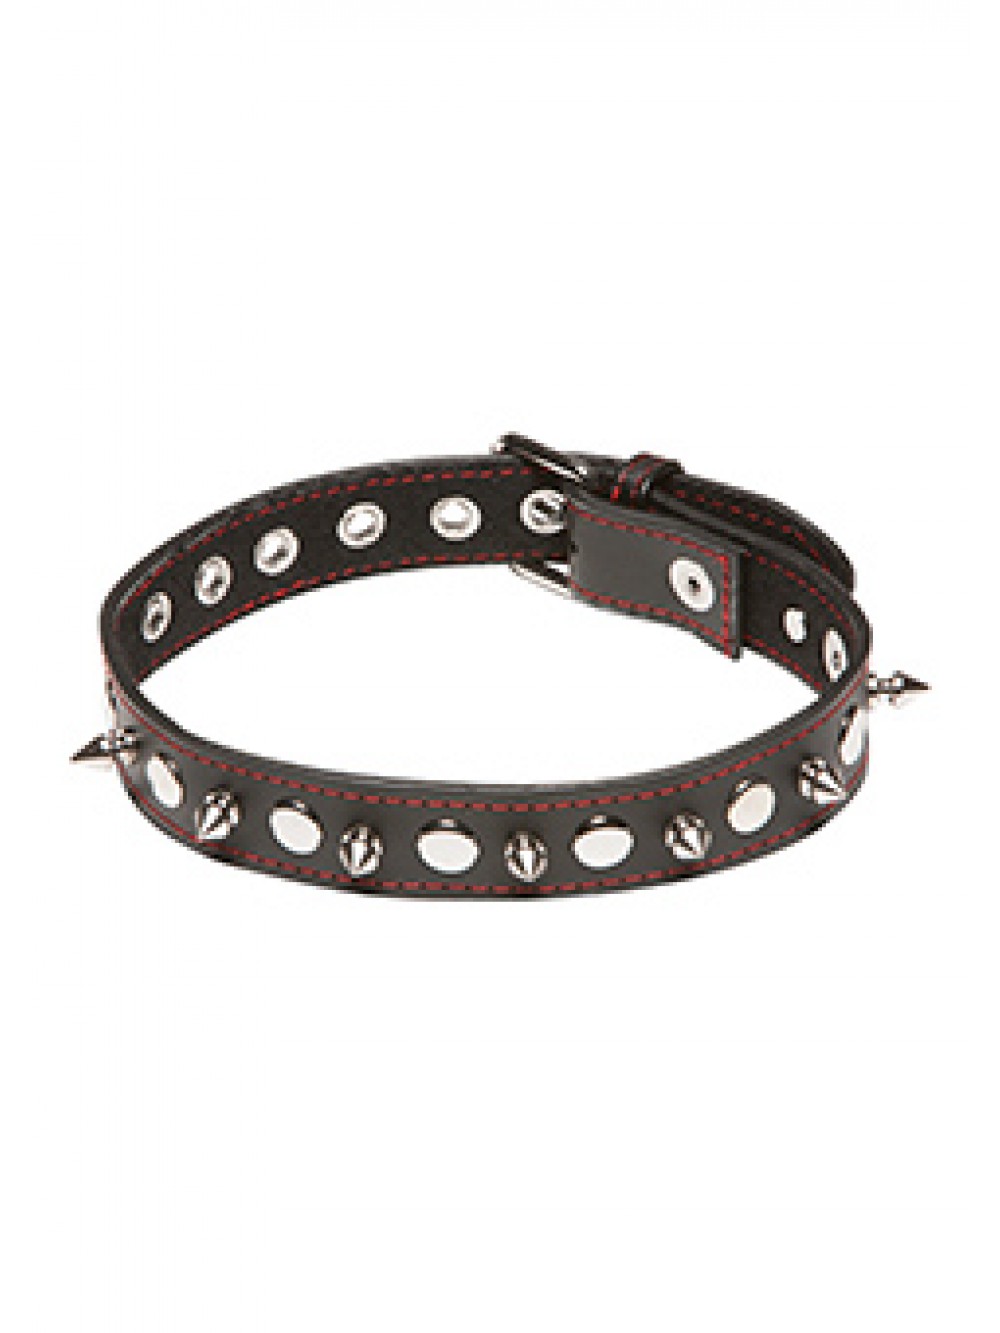 X-PLAY SPIKED COLLAR